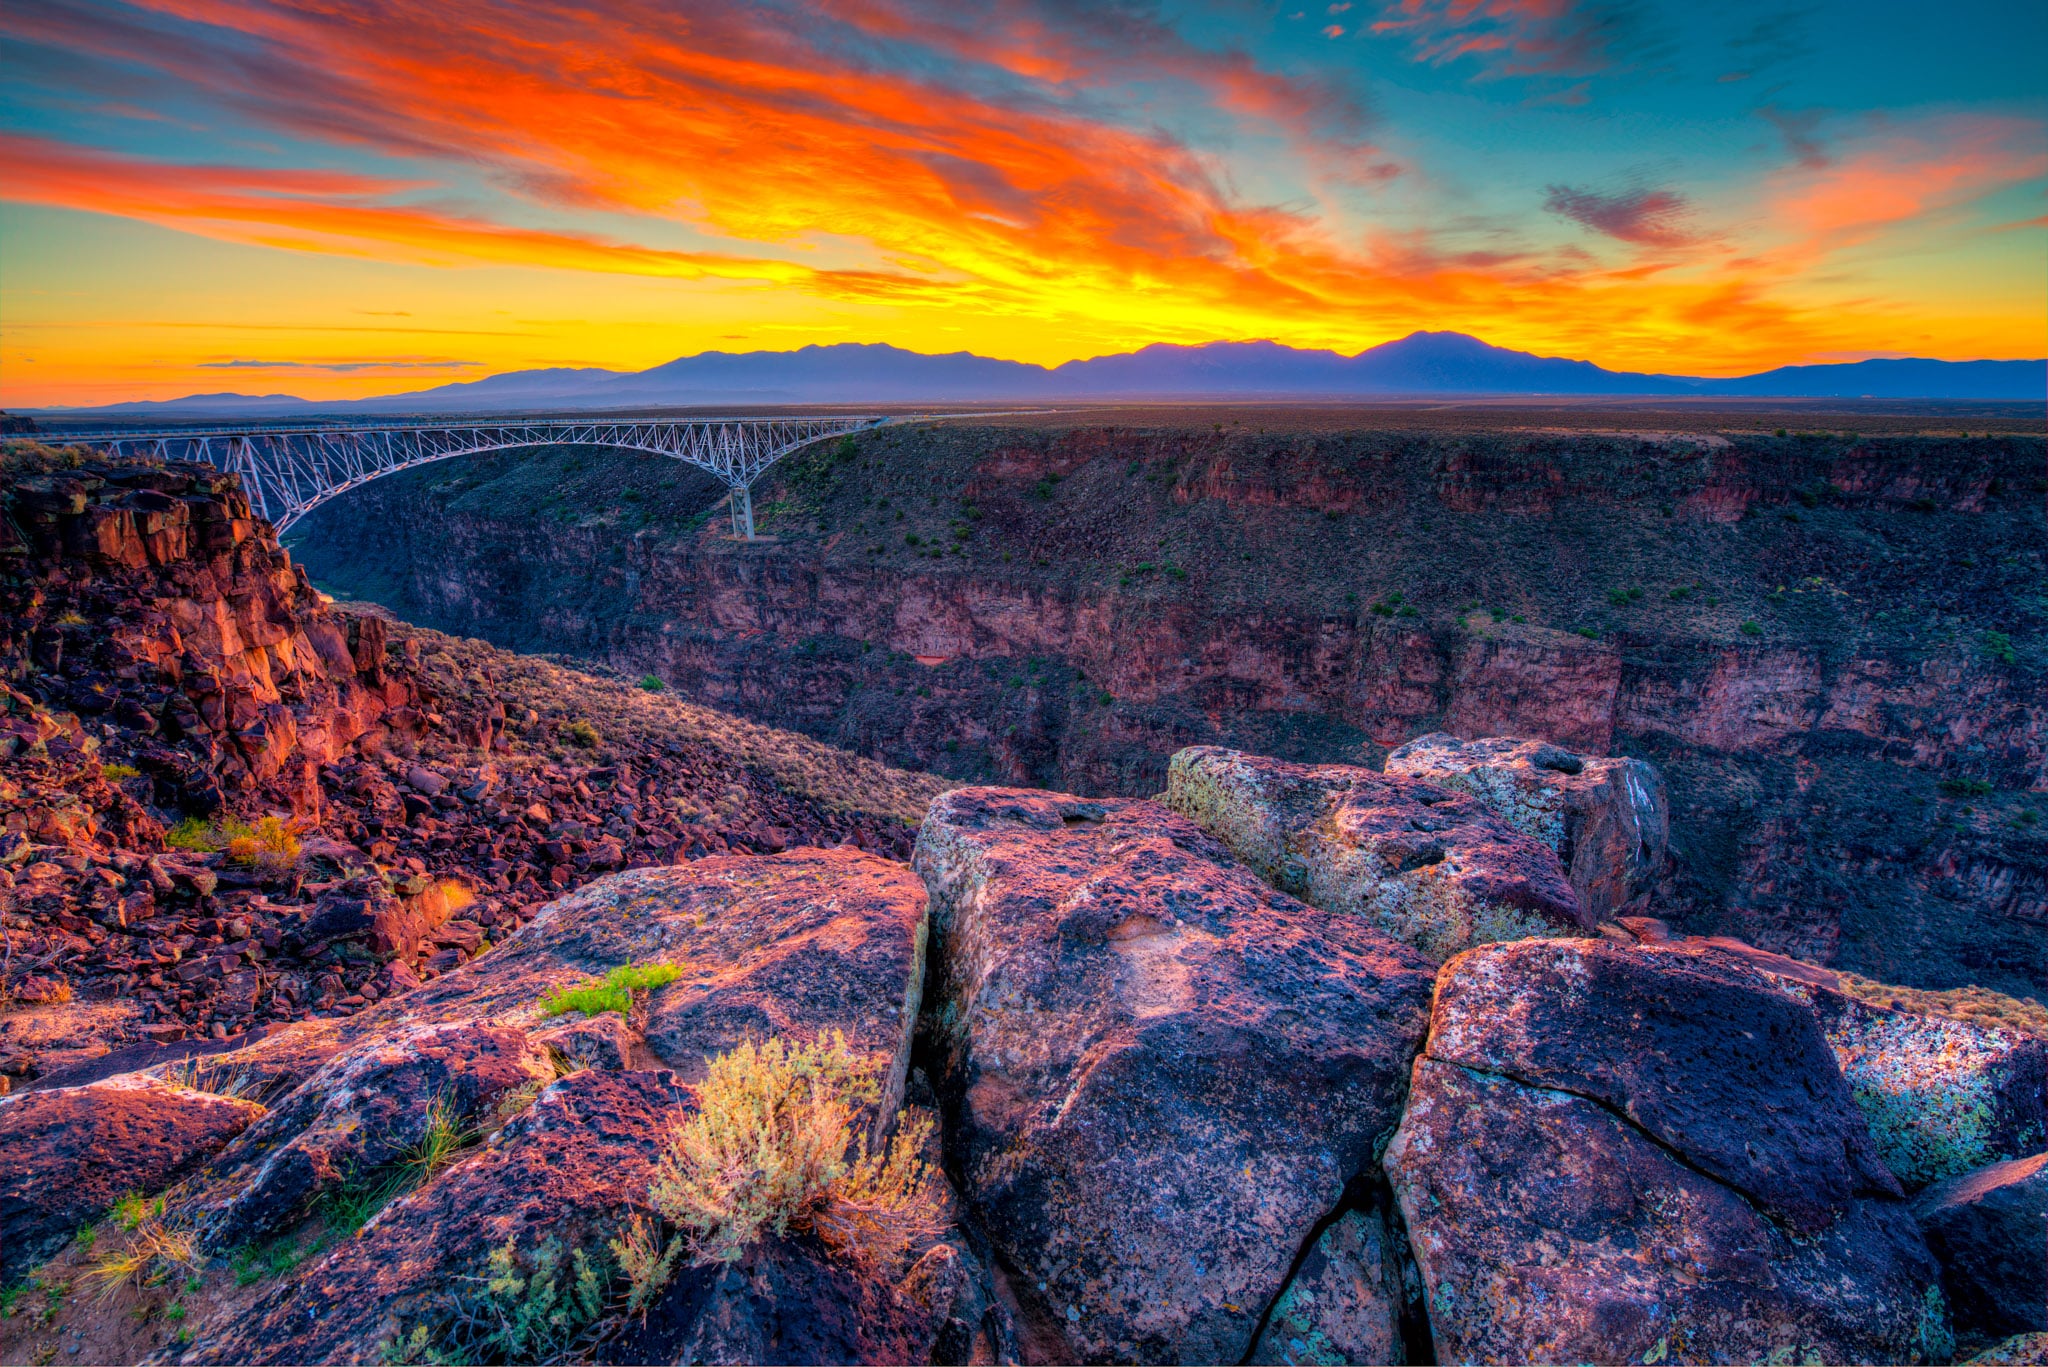 The Rio Grande Gorge at sunrise taken from near the Rio Grande Gorge Bridge outside of Taos, New Mexico.